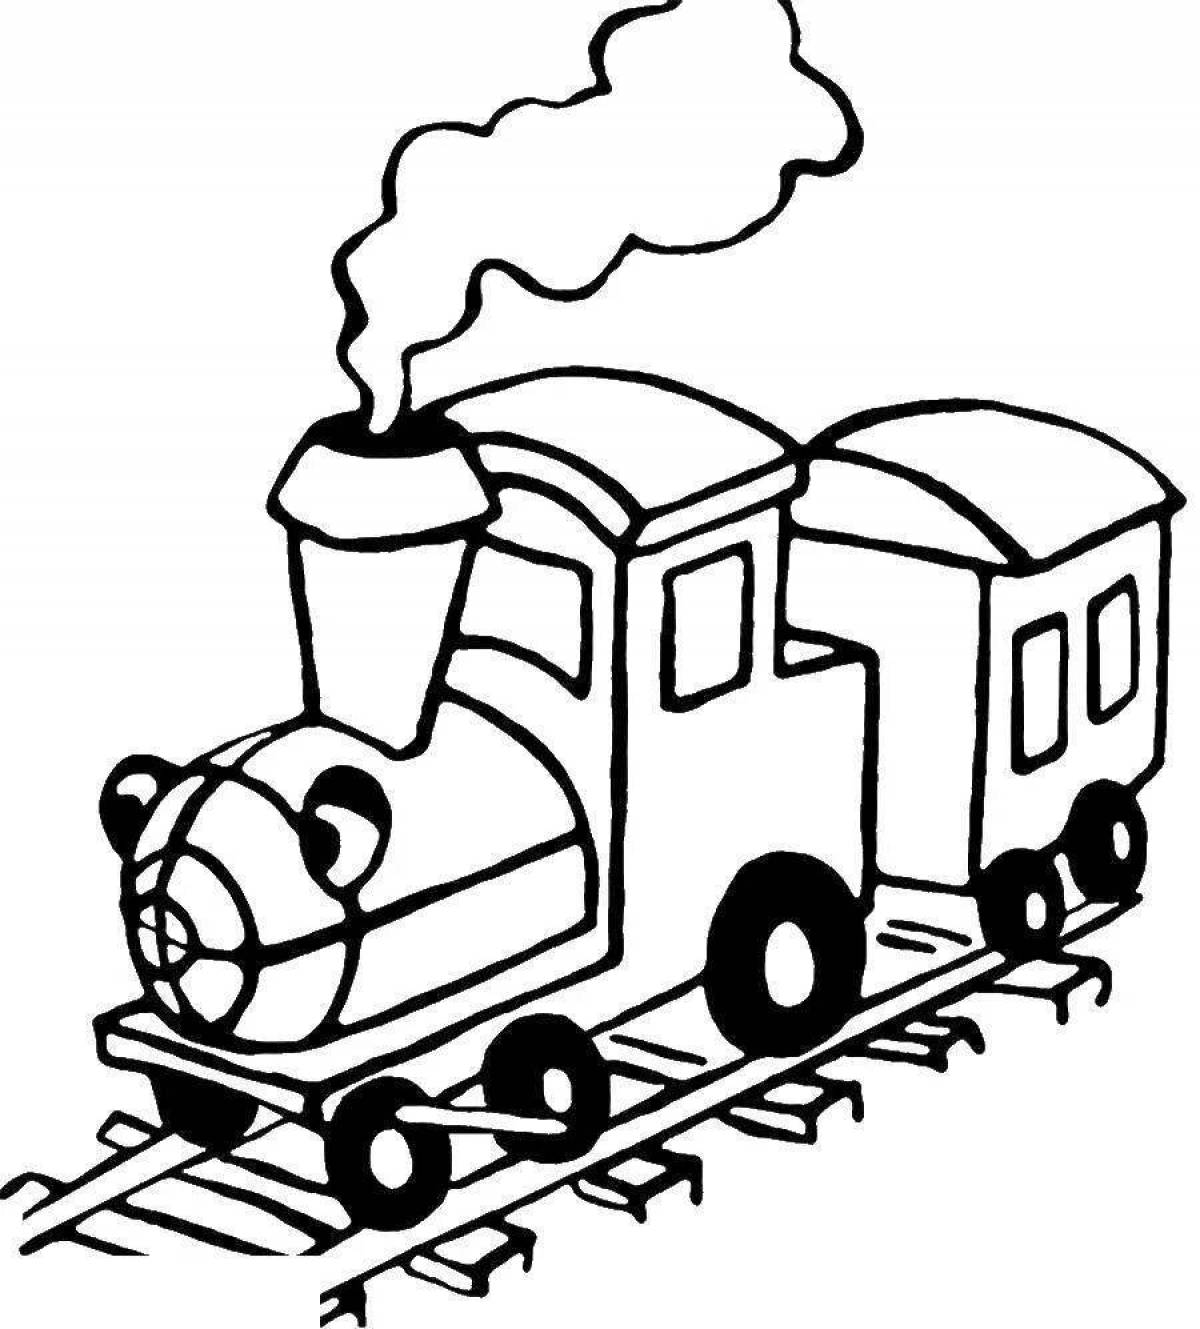 Fairy locomotive coloring pages for kids